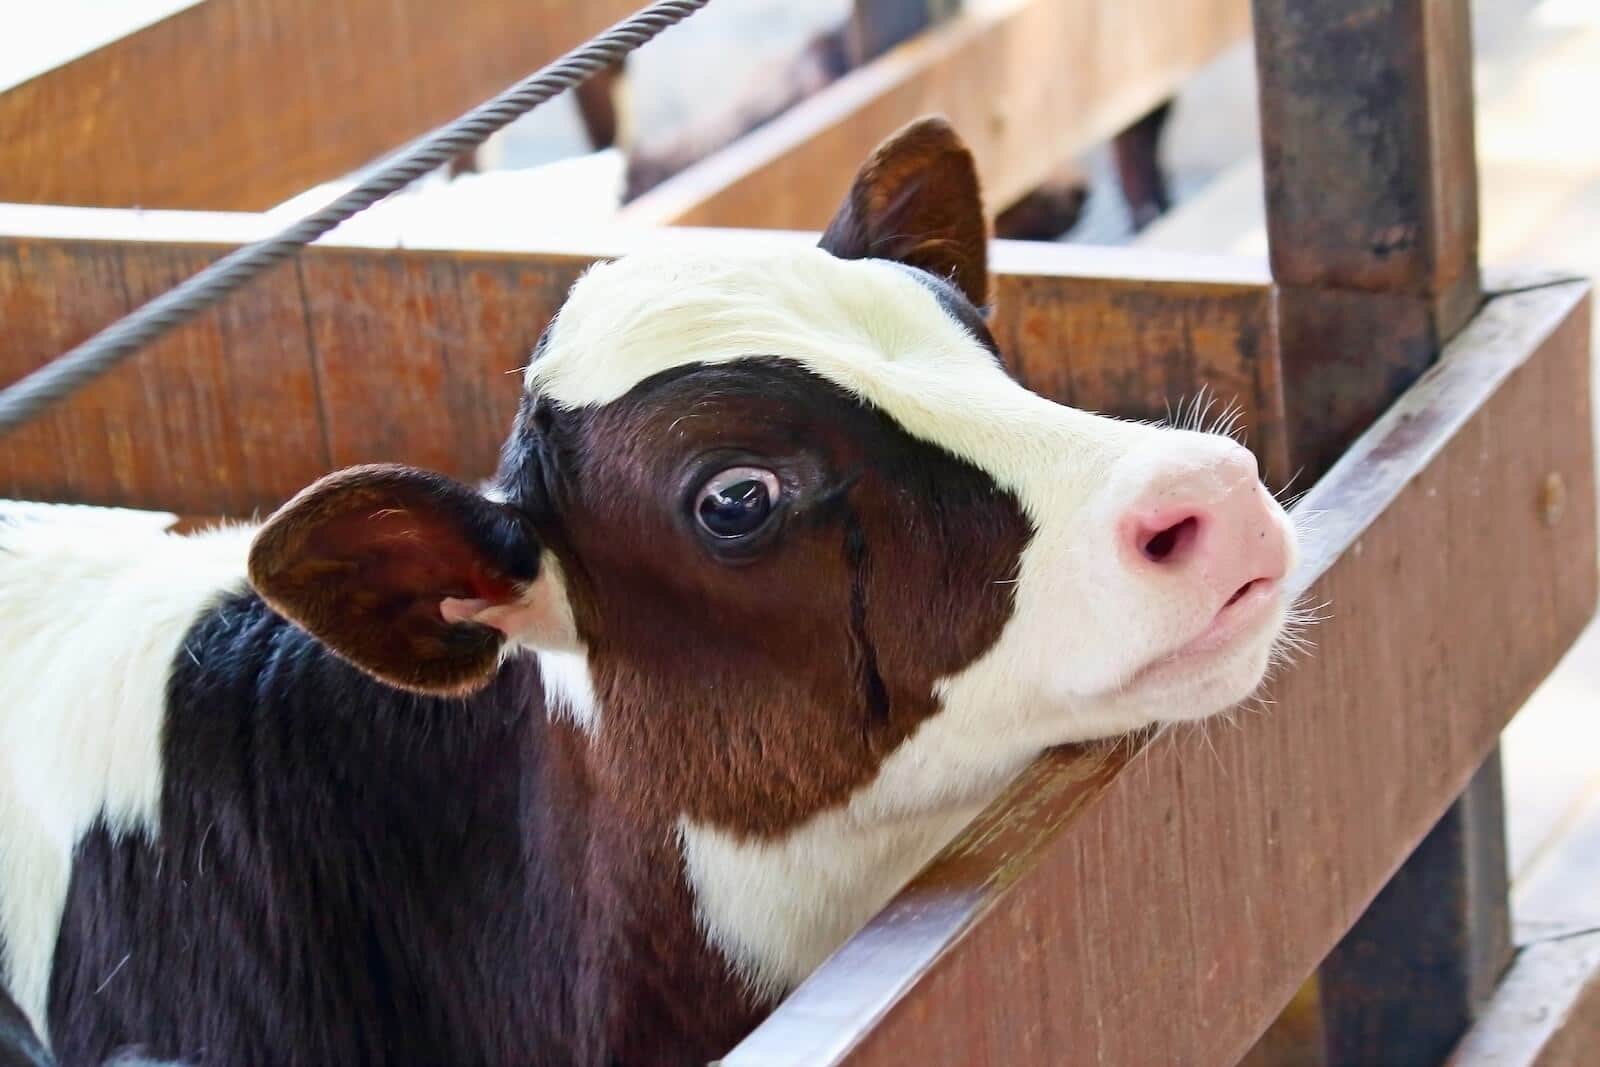 Eating Babies: The Ugly Truth About the Veal Industry